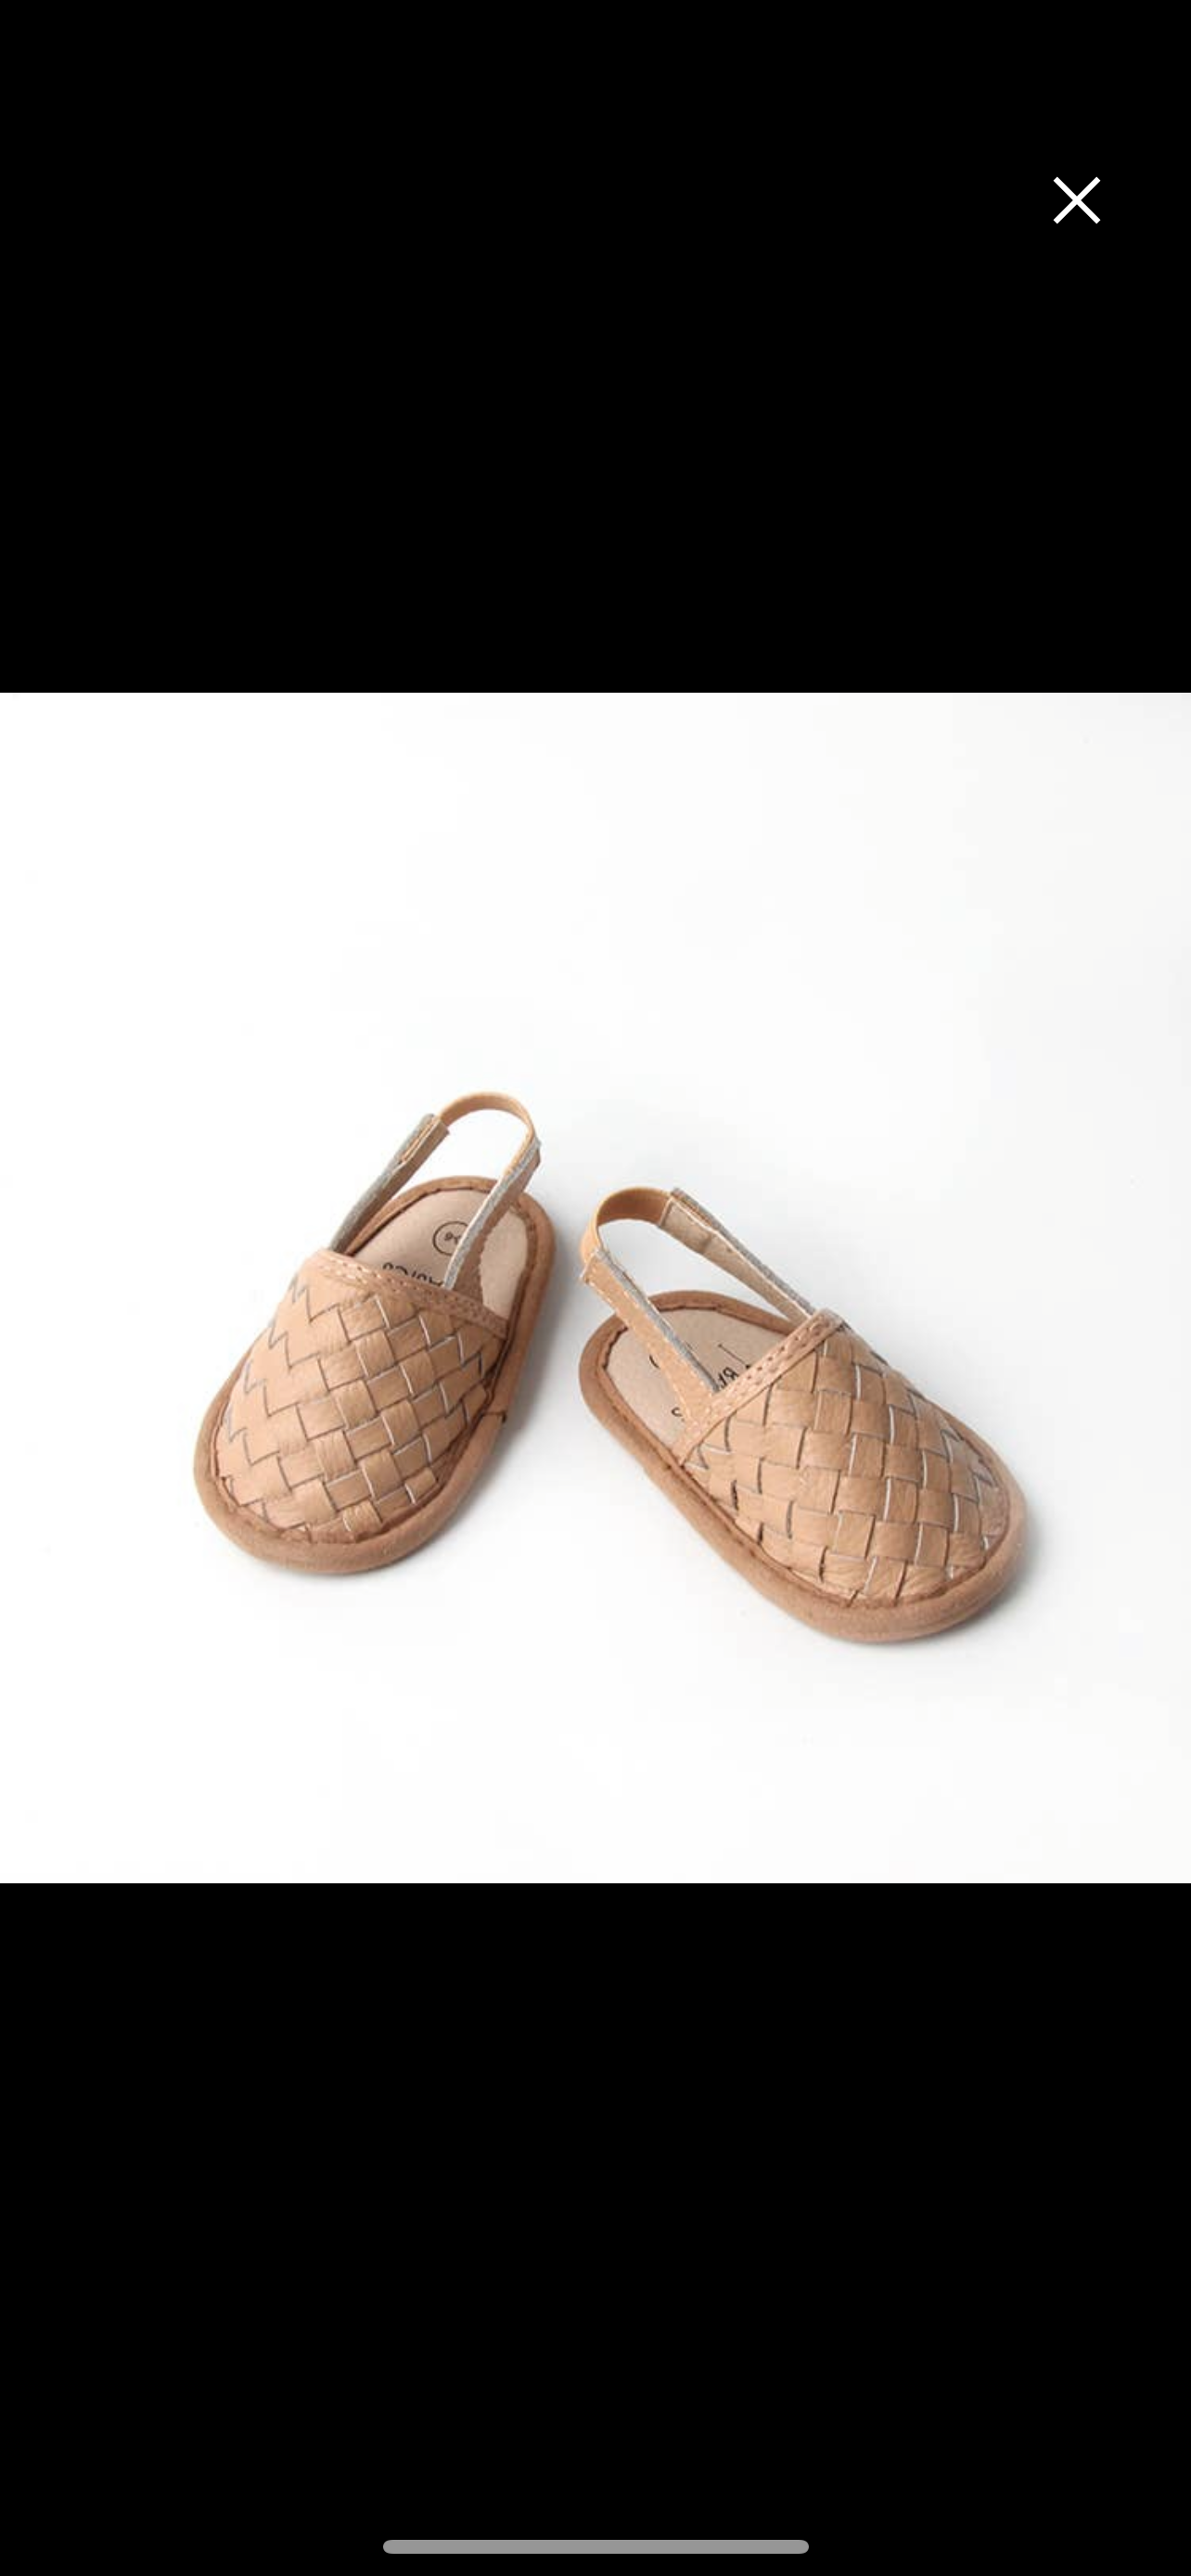 woven leather sandals